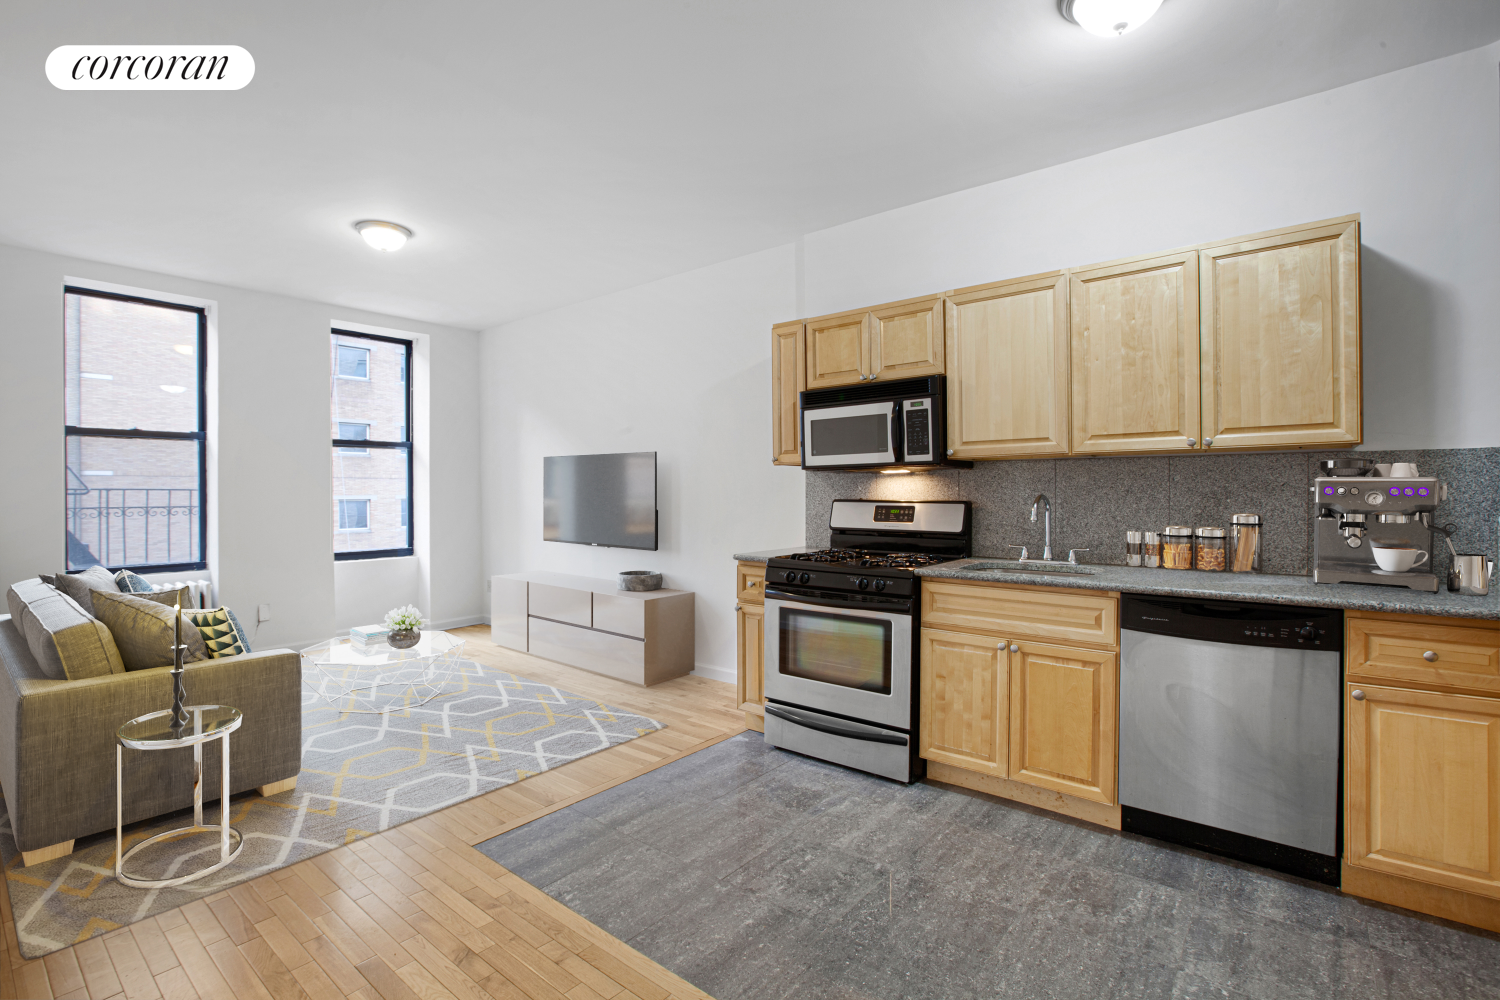 152 Columbus Avenue 4S, Lincoln Sq, Upper West Side, NYC - 1 Bedrooms  
1 Bathrooms  
3 Rooms - 